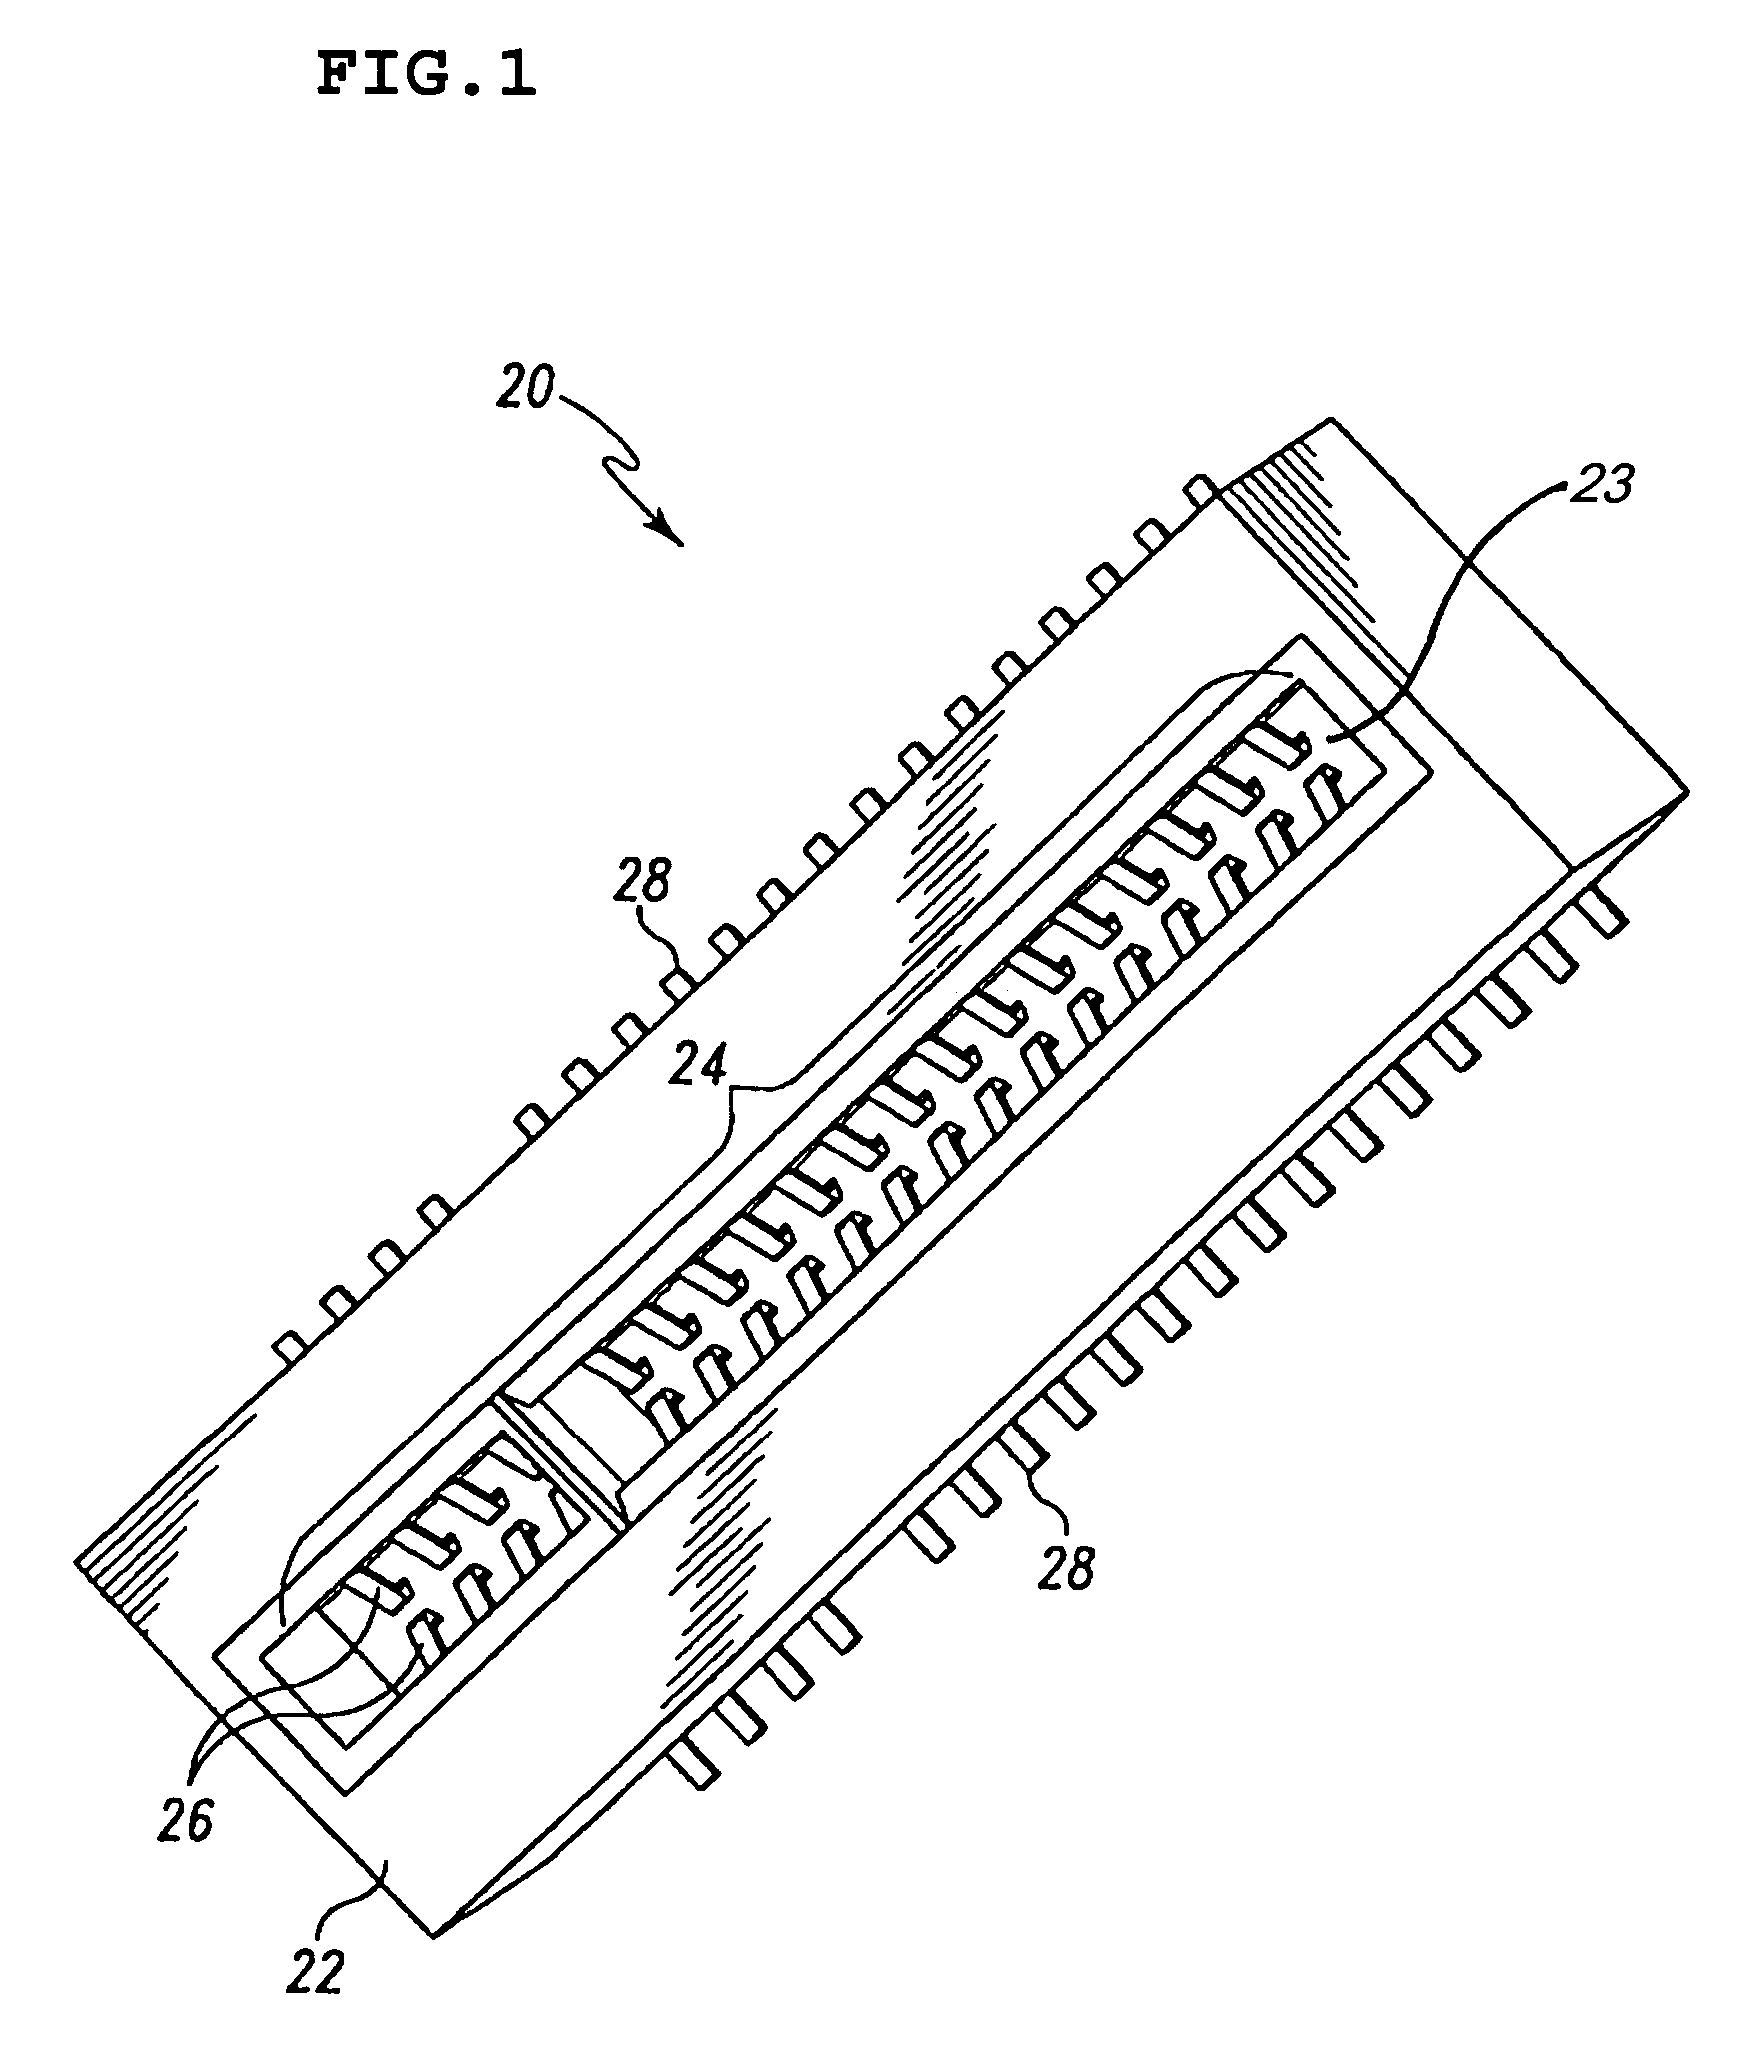 Electrical connector having a ground plane with independently configurable contacts